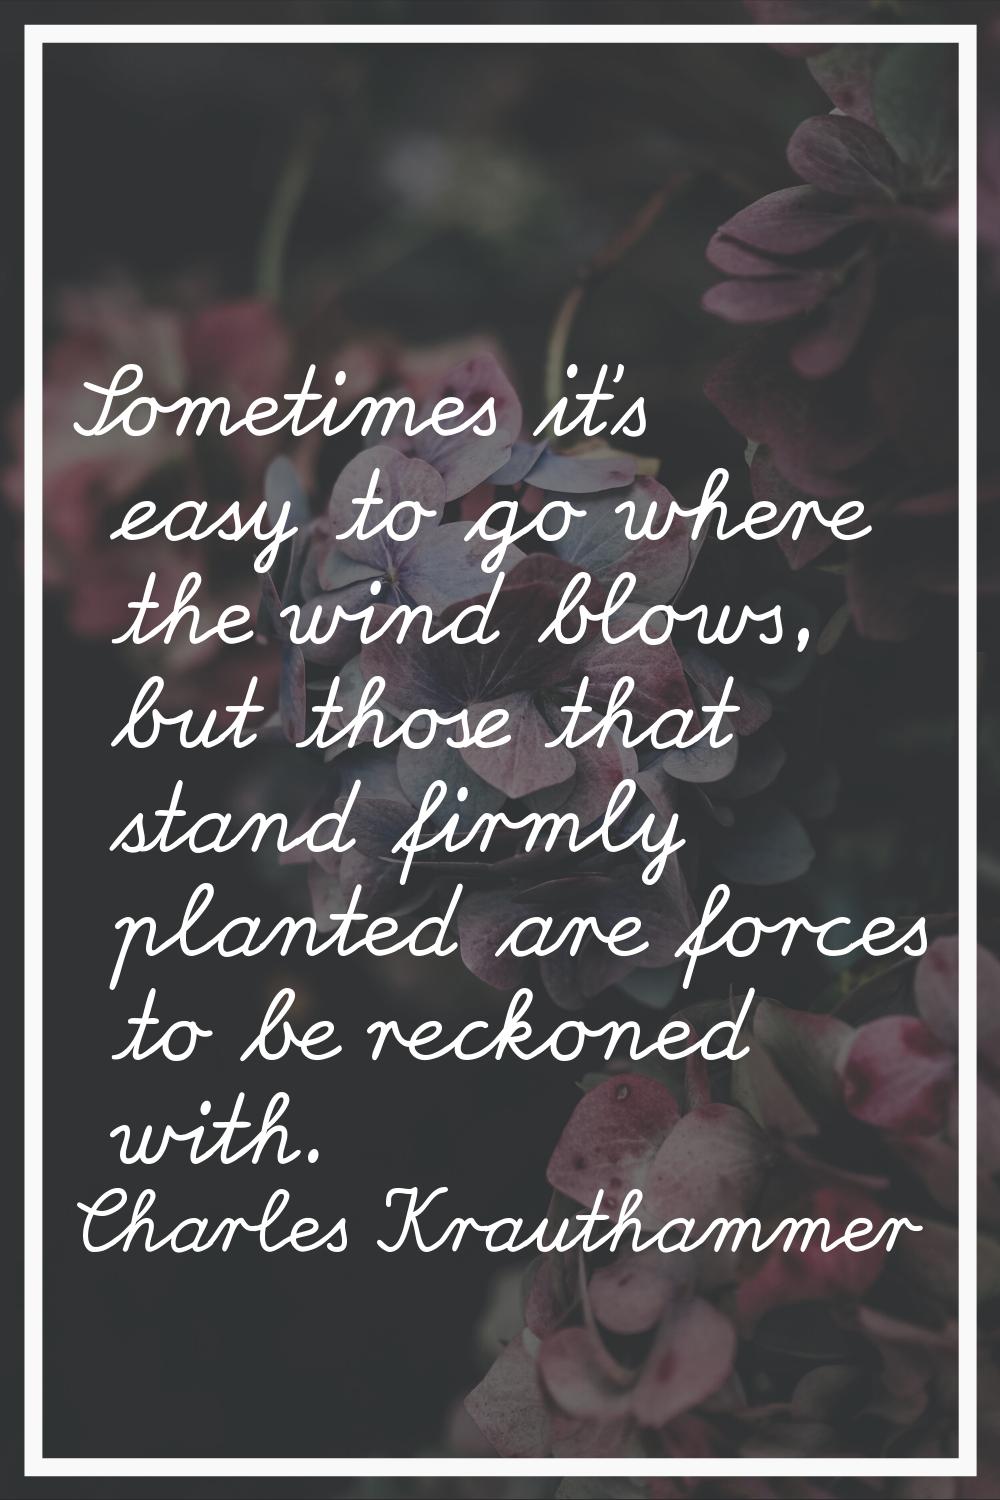 Sometimes it's easy to go where the wind blows, but those that stand firmly planted are forces to b